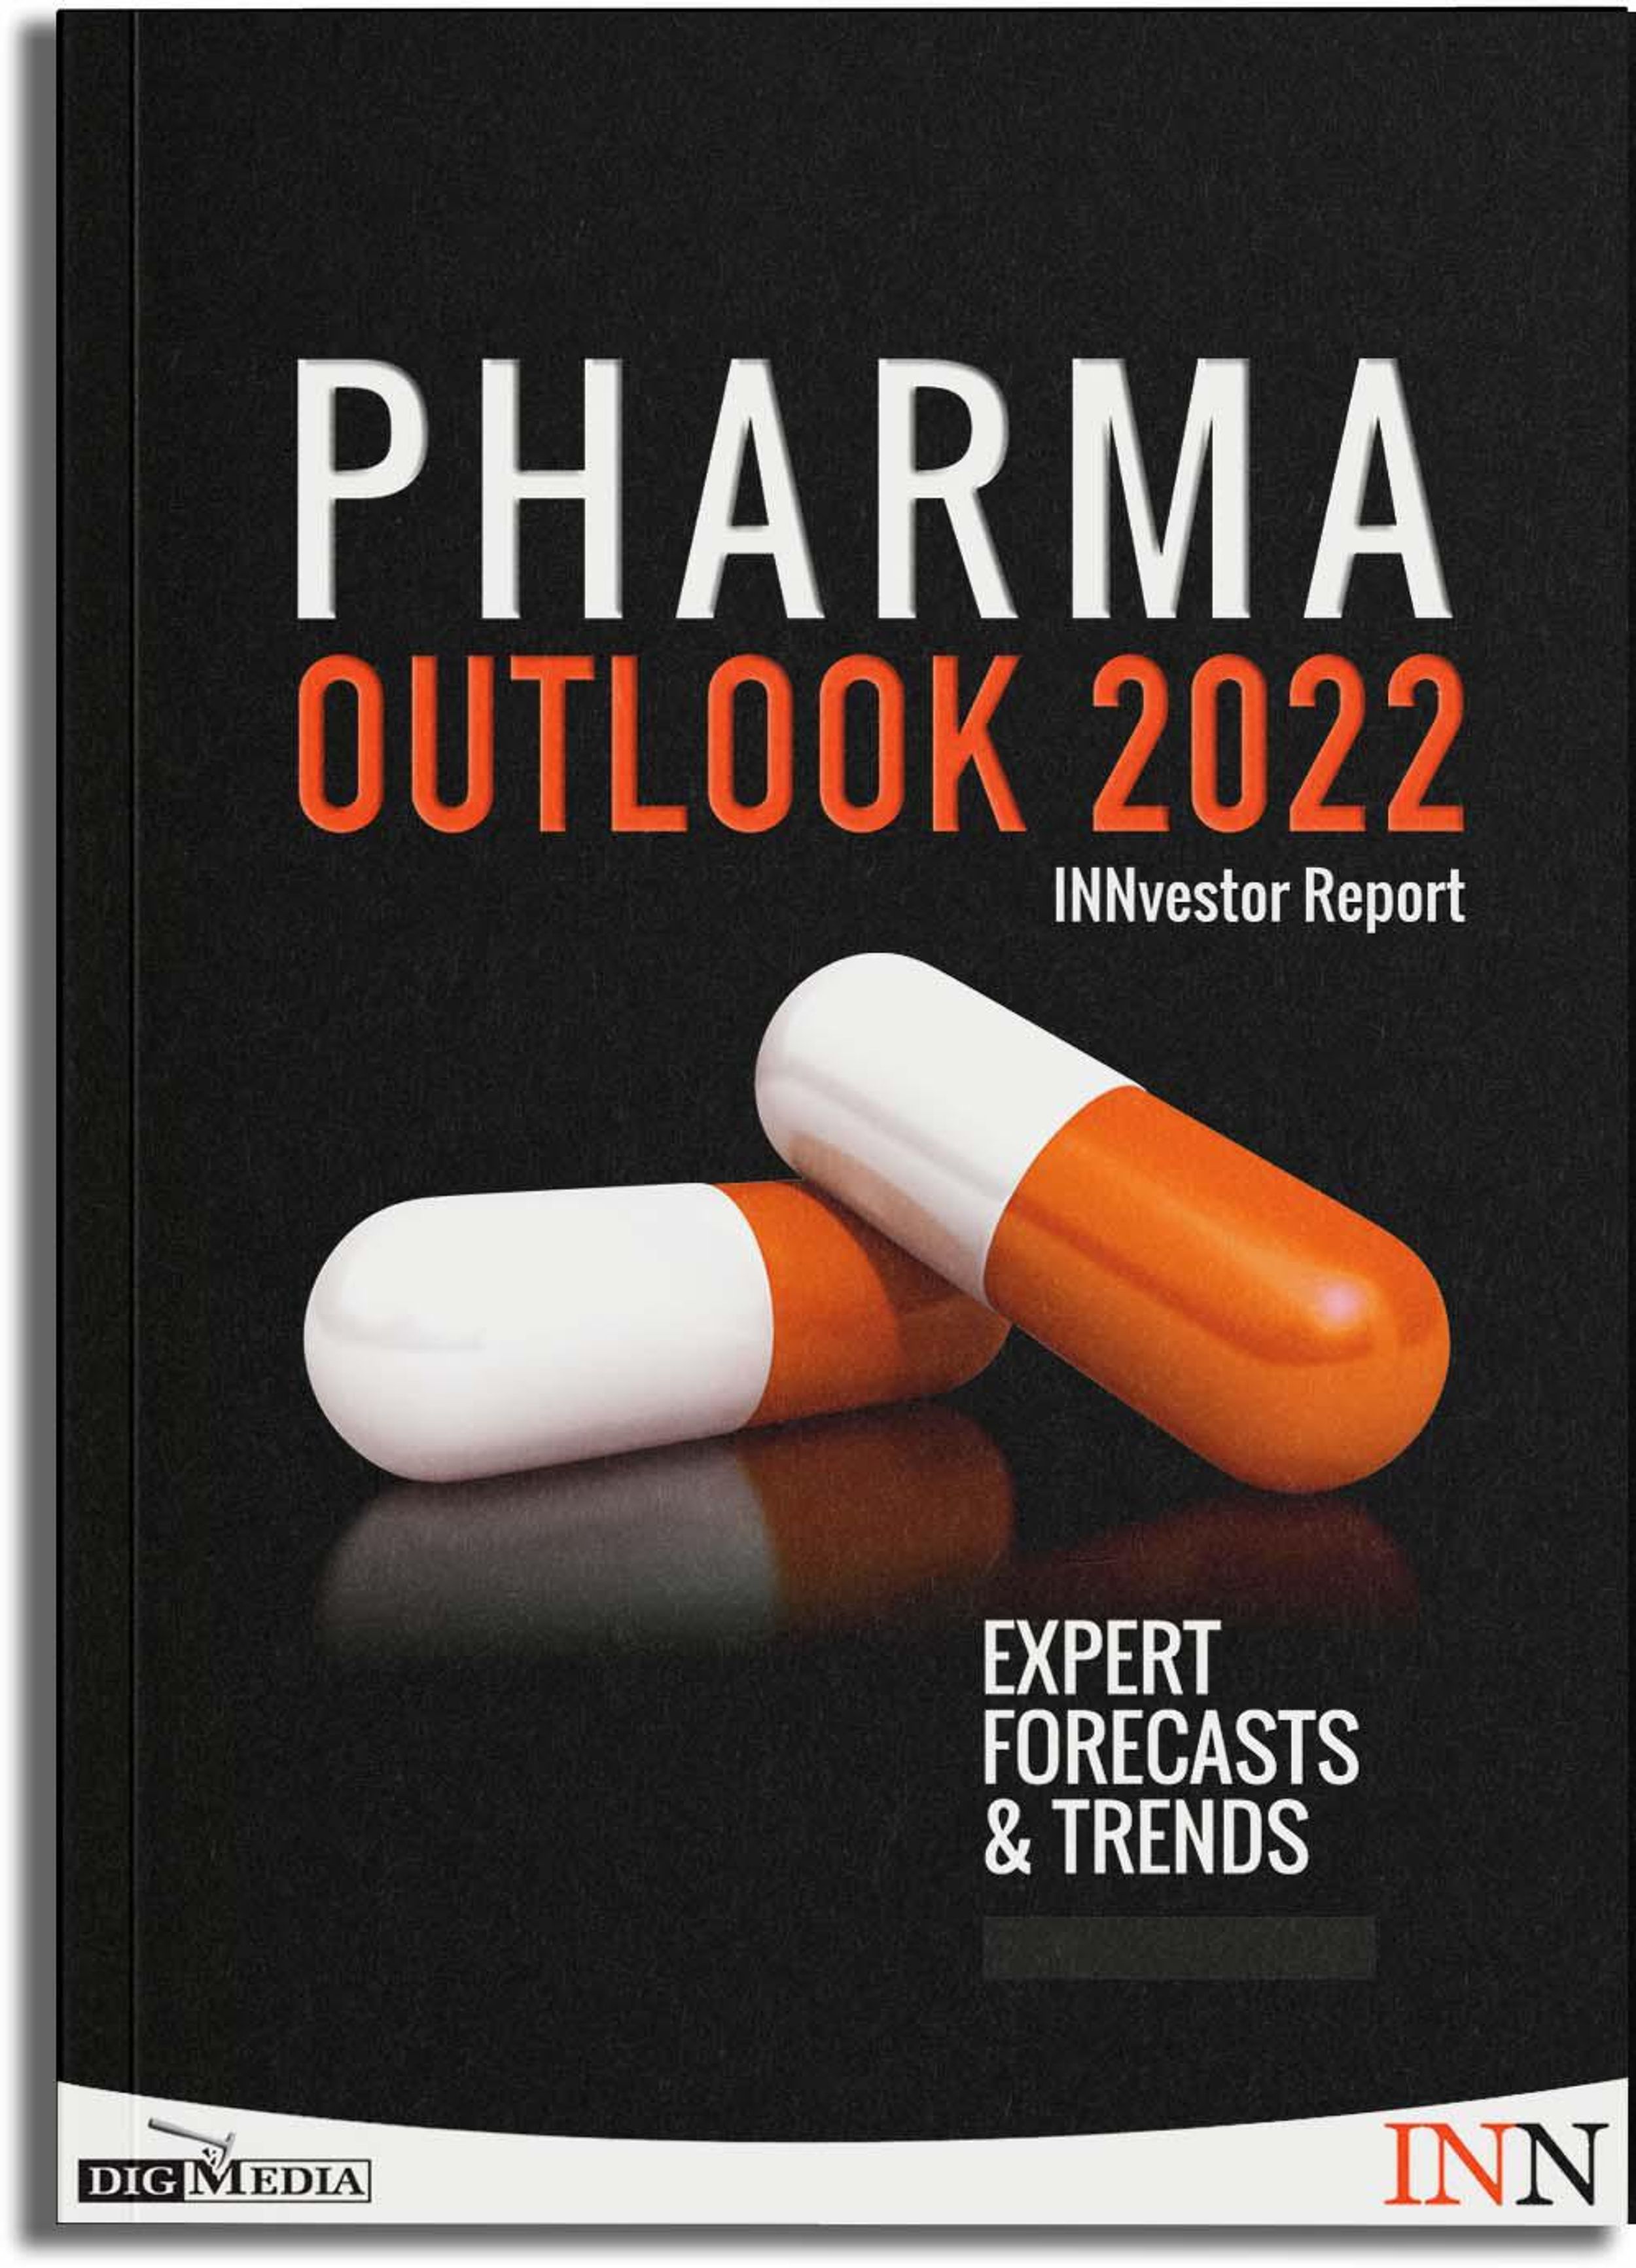 NEW! Download Your FREE 2022 Pharmaceuticals Outlook Report.